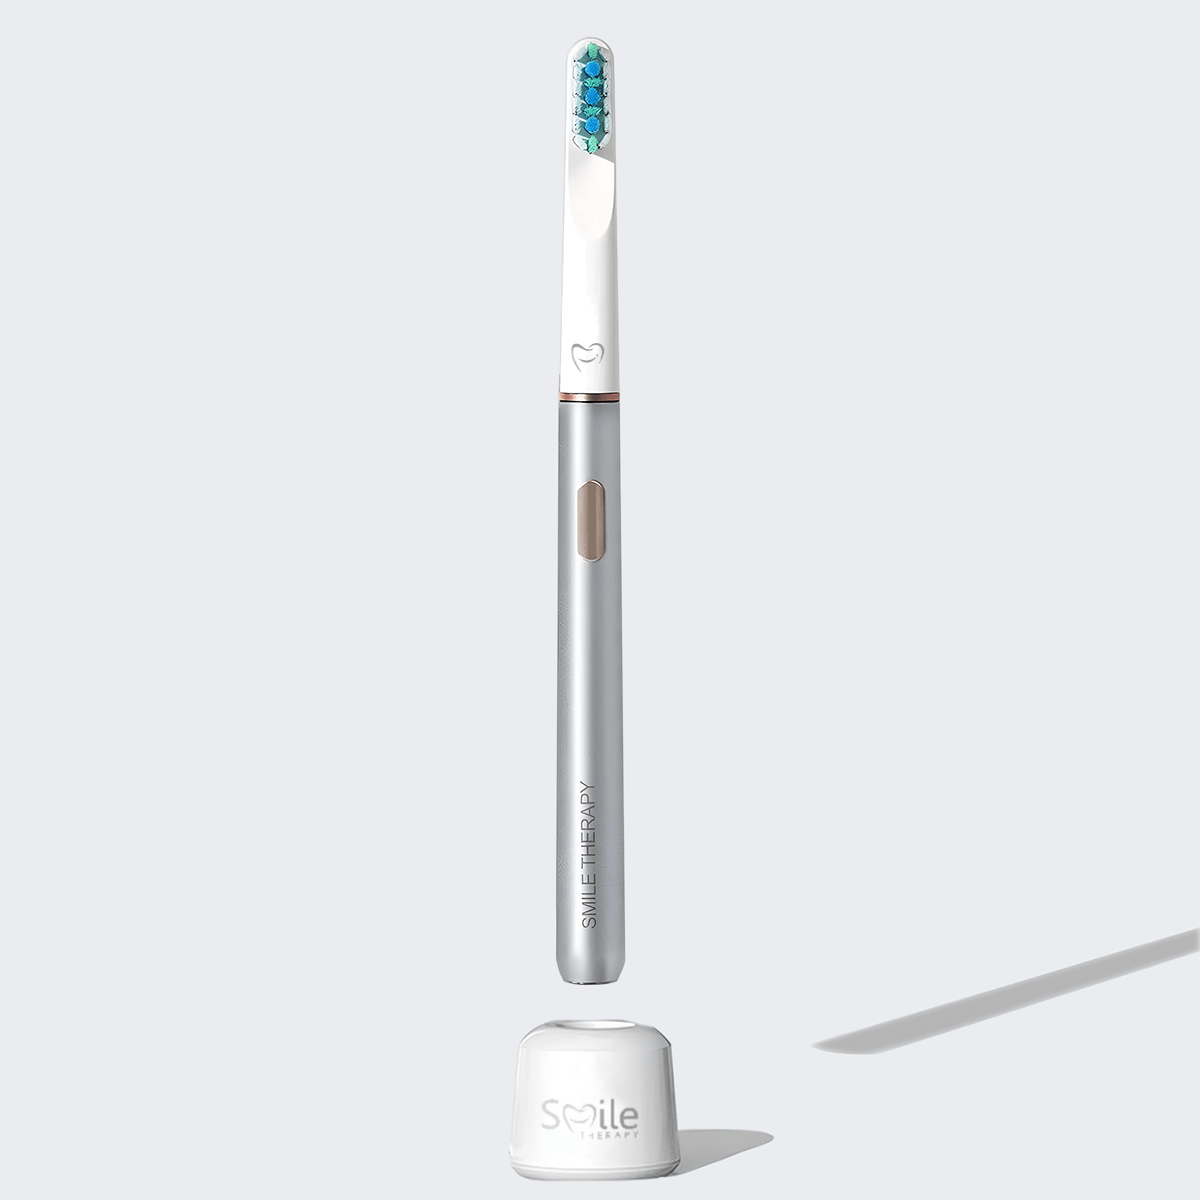 Air Advanced Electric Toothbrush 3-in-1 DP